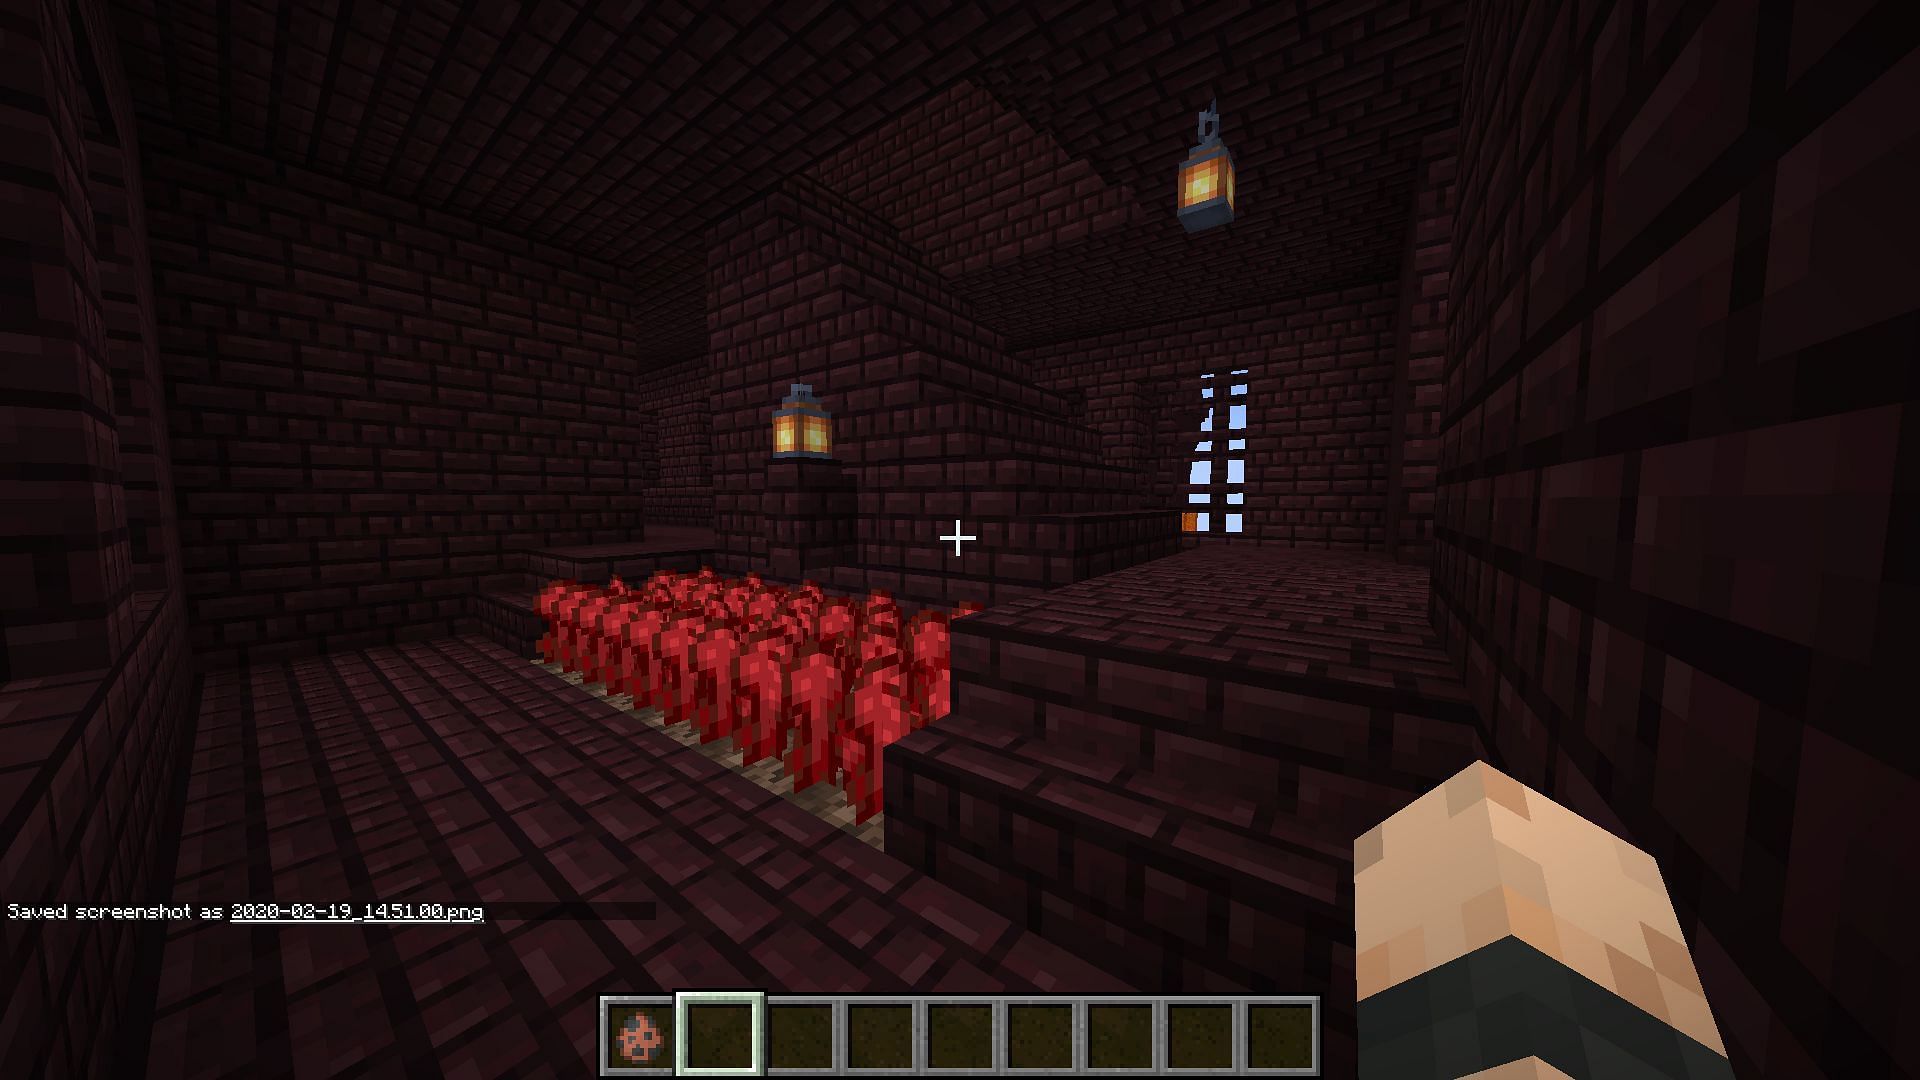 Nether wart found growing inside of a nether fortress (Image via Minecraft)